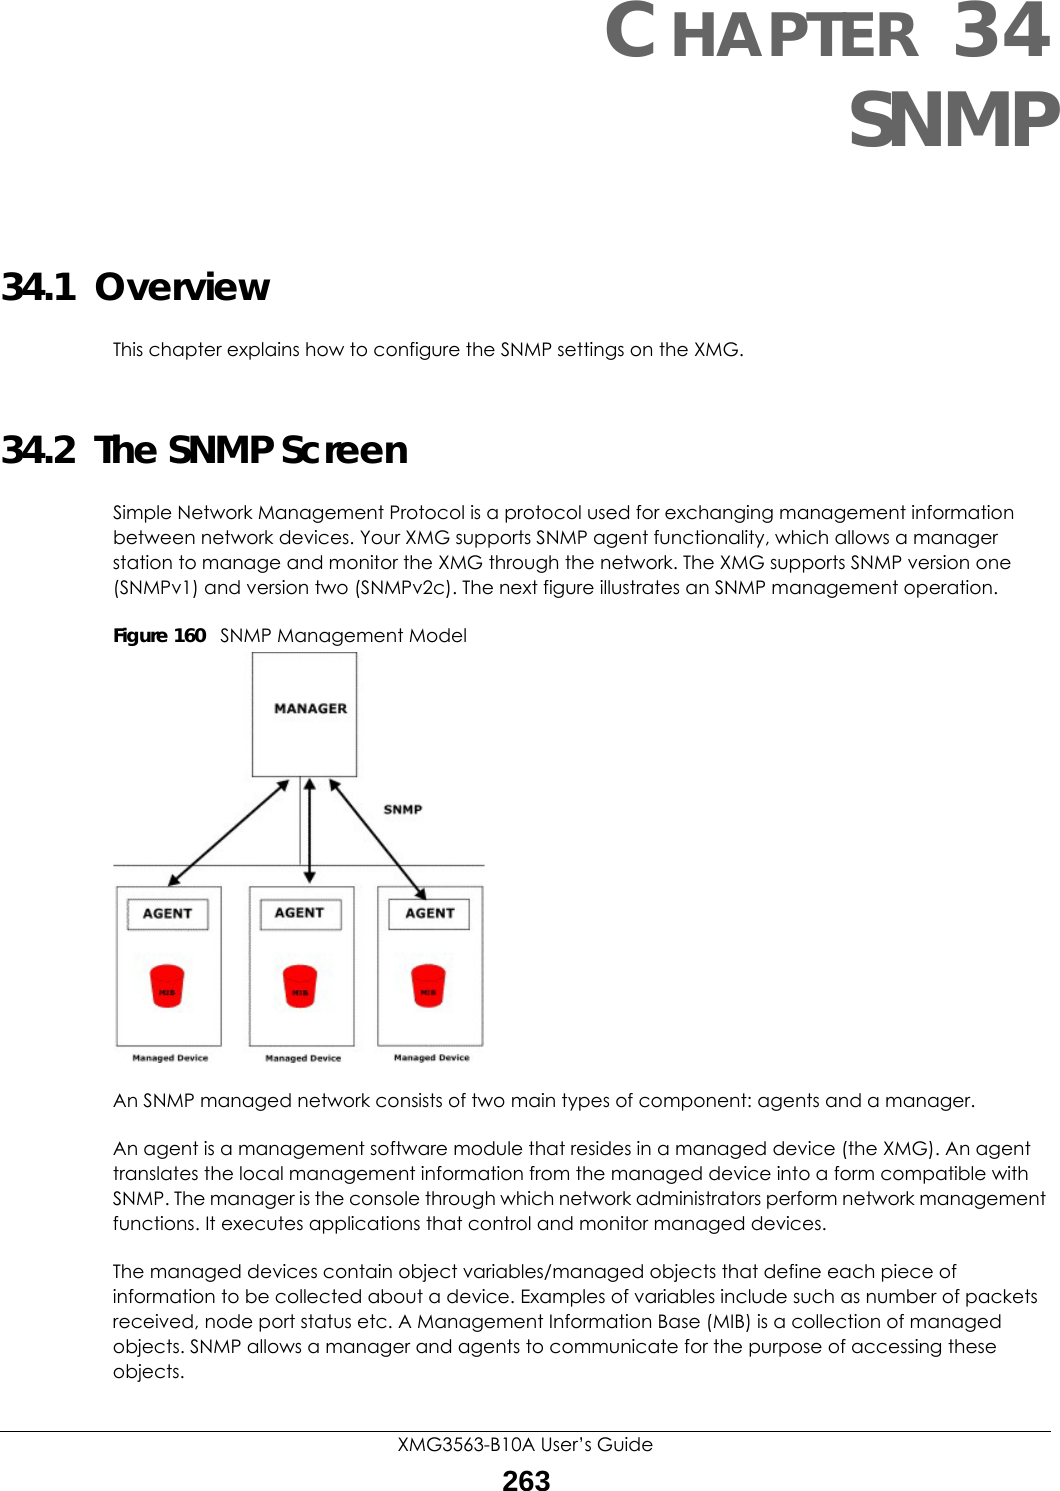 XMG3563-B10A User’s Guide263CHAPTER 34SNMP34.1  OverviewThis chapter explains how to configure the SNMP settings on the XMG.34.2  The SNMP ScreenSimple Network Management Protocol is a protocol used for exchanging management information between network devices. Your XMG supports SNMP agent functionality, which allows a manager station to manage and monitor the XMG through the network. The XMG supports SNMP version one (SNMPv1) and version two (SNMPv2c). The next figure illustrates an SNMP management operation.Figure 160   SNMP Management ModelAn SNMP managed network consists of two main types of component: agents and a manager. An agent is a management software module that resides in a managed device (the XMG). An agent translates the local management information from the managed device into a form compatible with SNMP. The manager is the console through which network administrators perform network management functions. It executes applications that control and monitor managed devices. The managed devices contain object variables/managed objects that define each piece of information to be collected about a device. Examples of variables include such as number of packets received, node port status etc. A Management Information Base (MIB) is a collection of managed objects. SNMP allows a manager and agents to communicate for the purpose of accessing these objects.